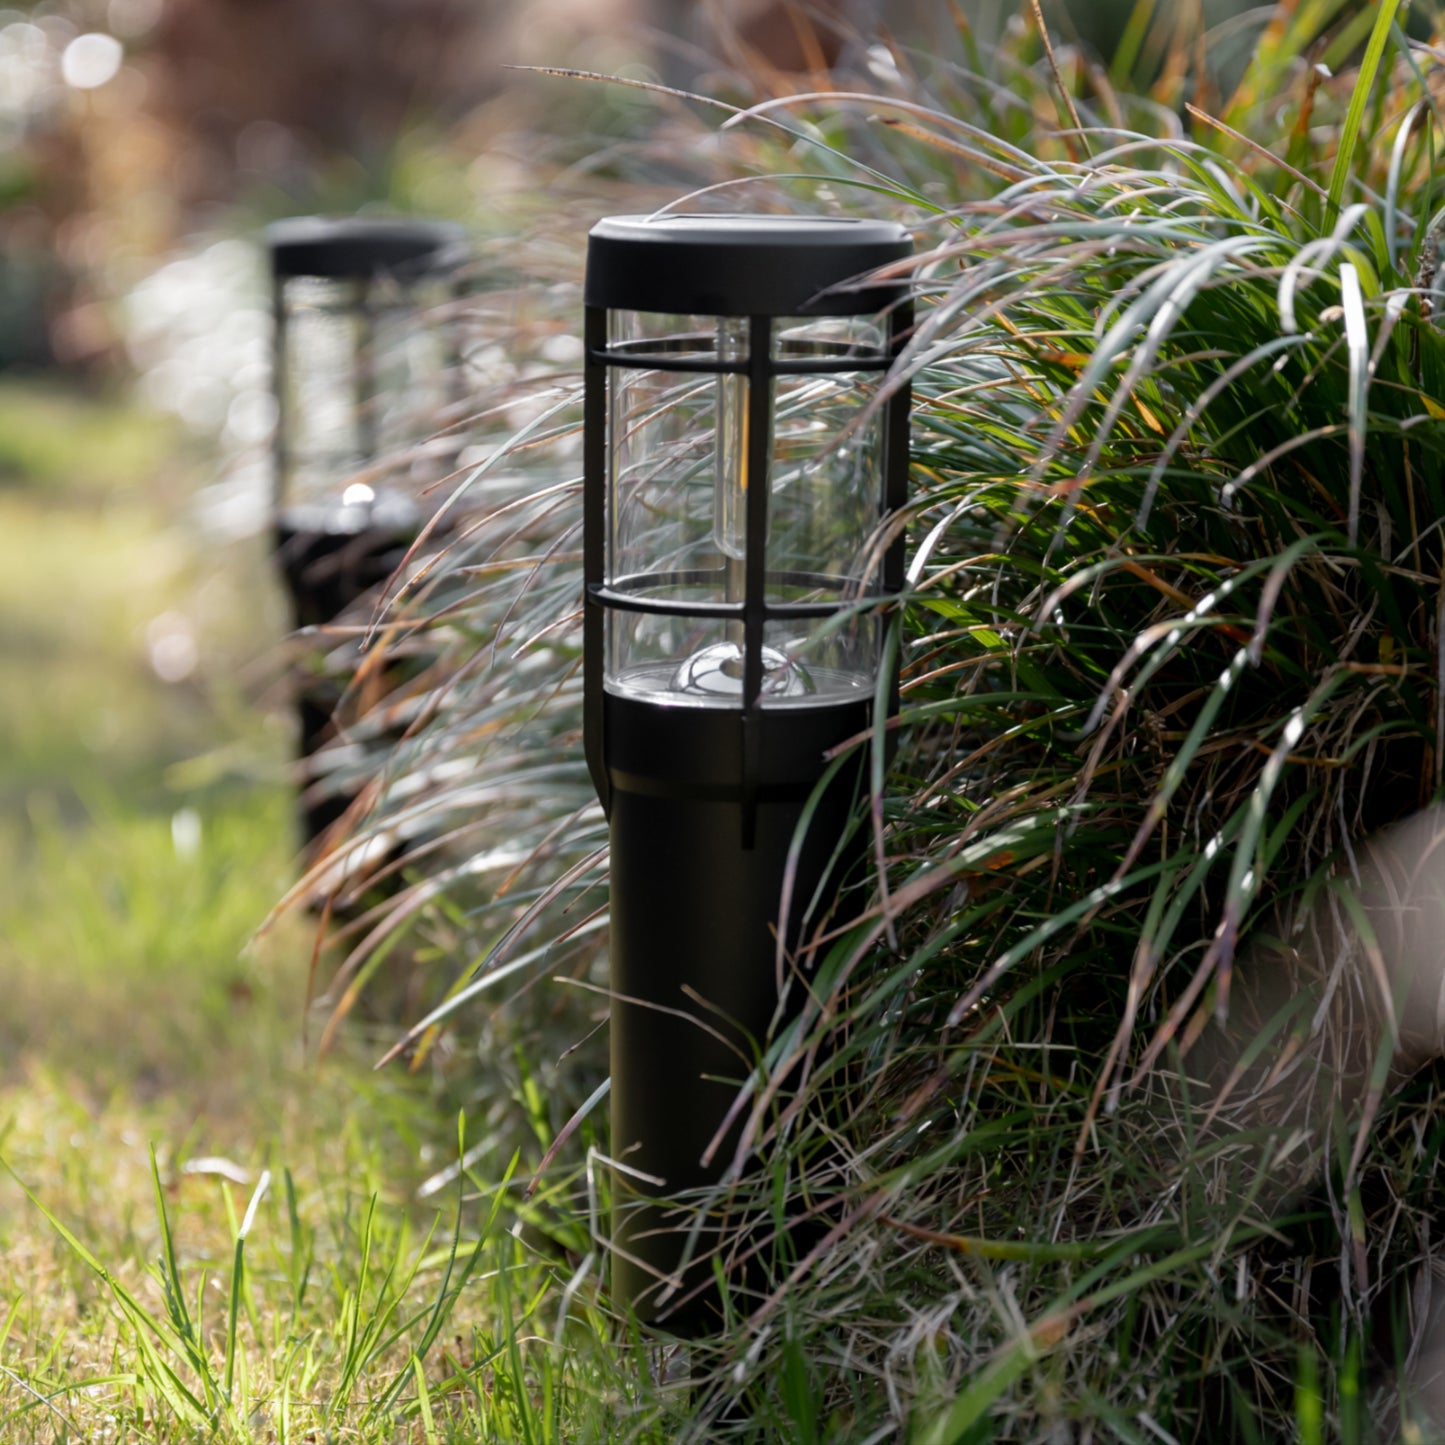 Two solar path lights in the grass in front of the green bush during the day